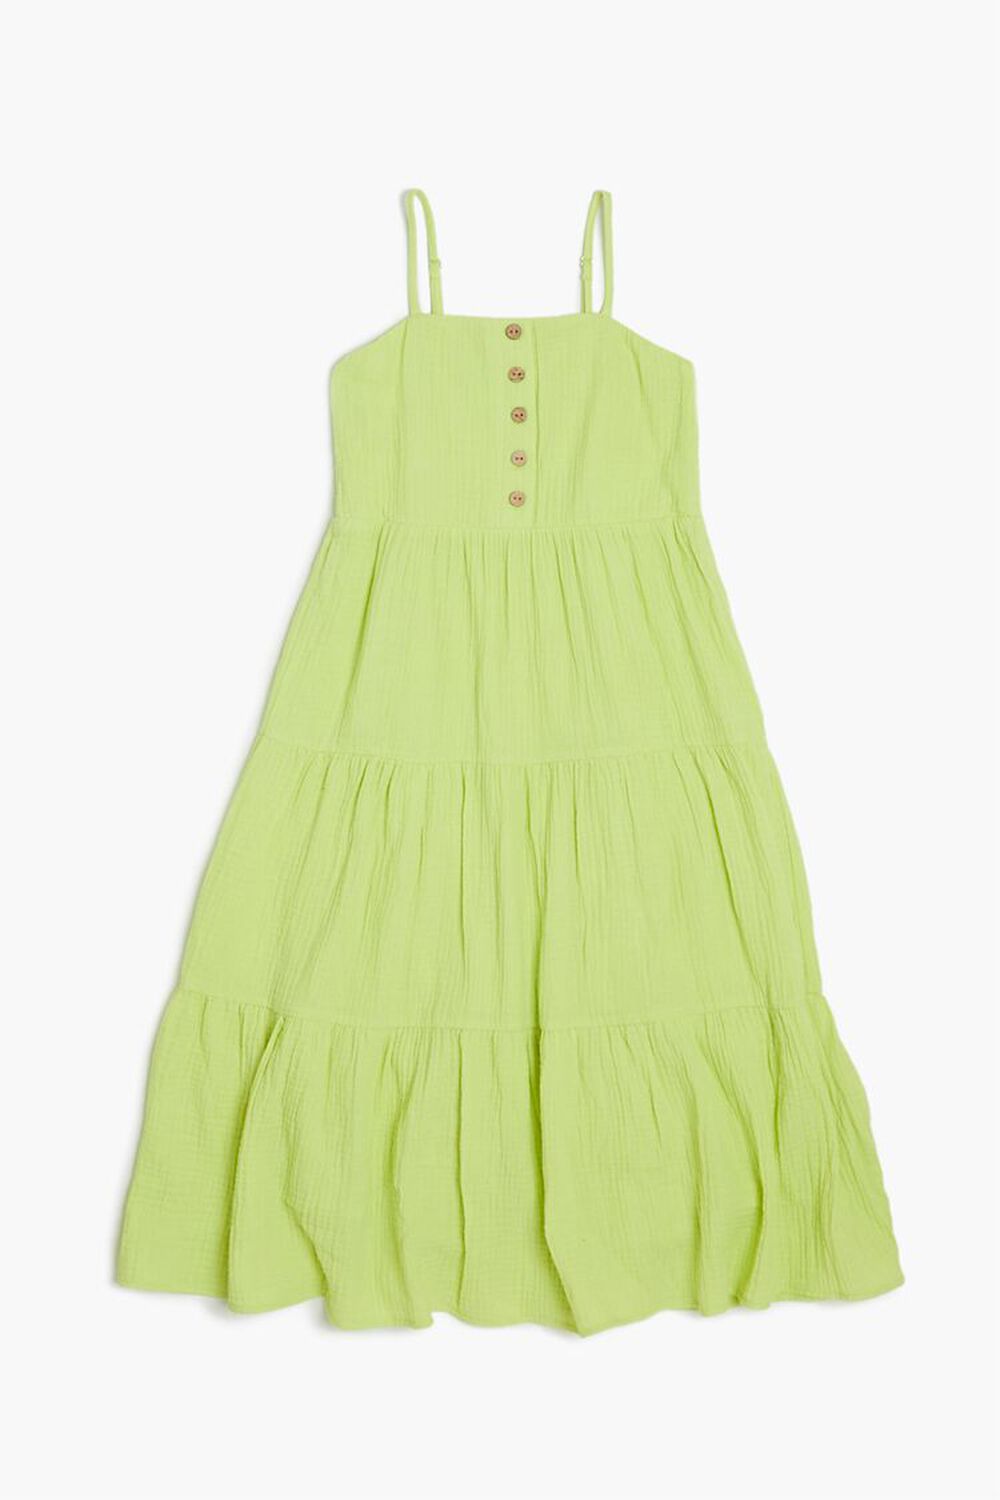 LIME Girls Tiered Cami Dress (Kids), image 1